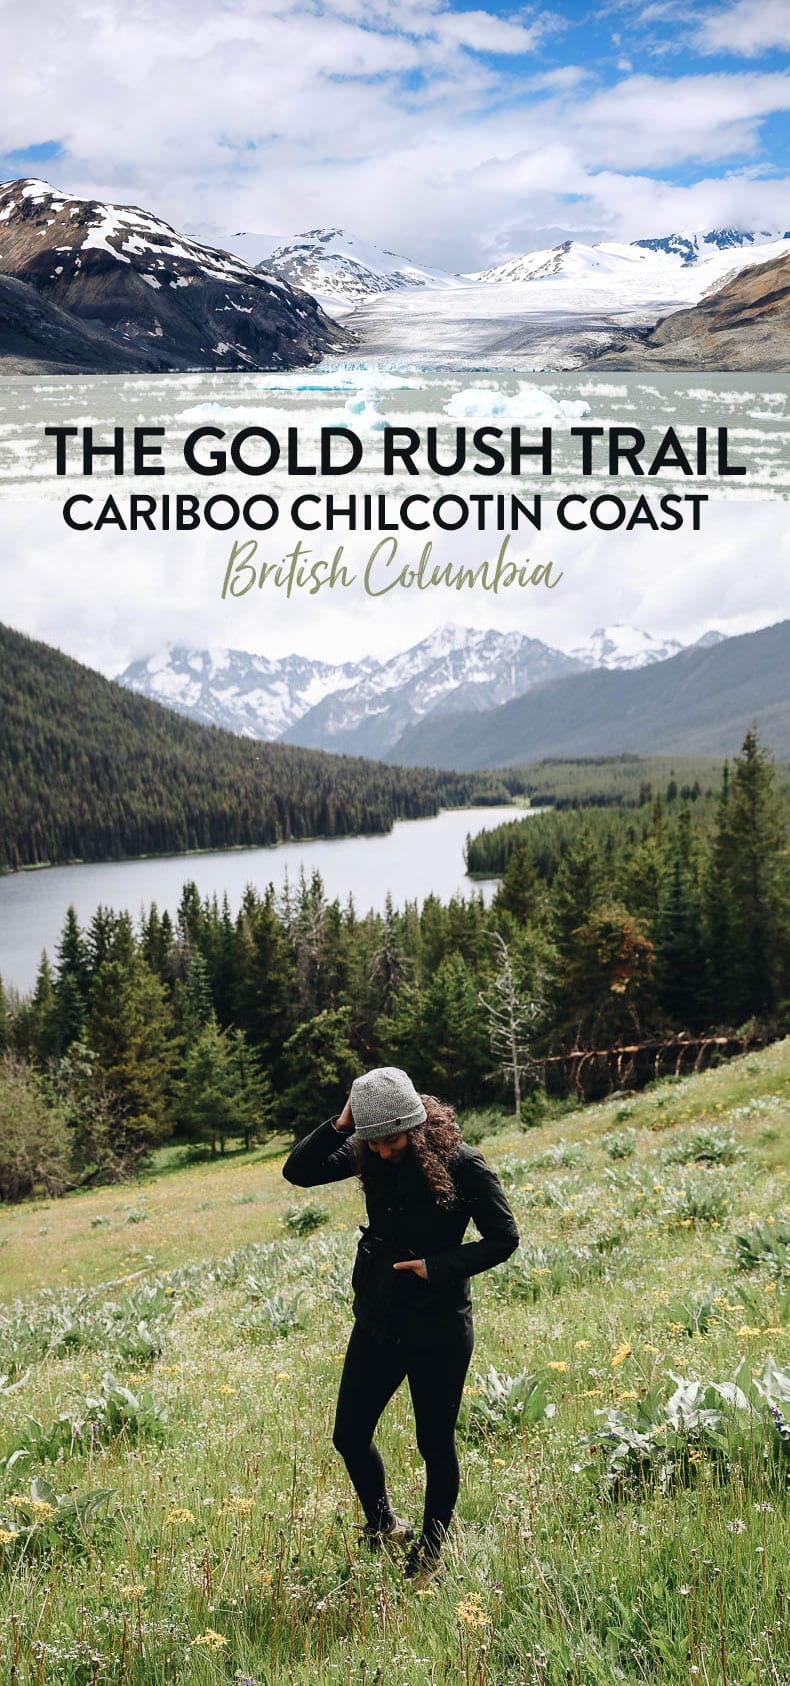 Are you ready for an off-the-beaten path adventure? Head to beautiful British Columbia to explore the Caribou Chilcotin Coast and the Gold Rush Trail in this Caribou Gold Rush Trail Travel Guide #travel #britishcolumbia